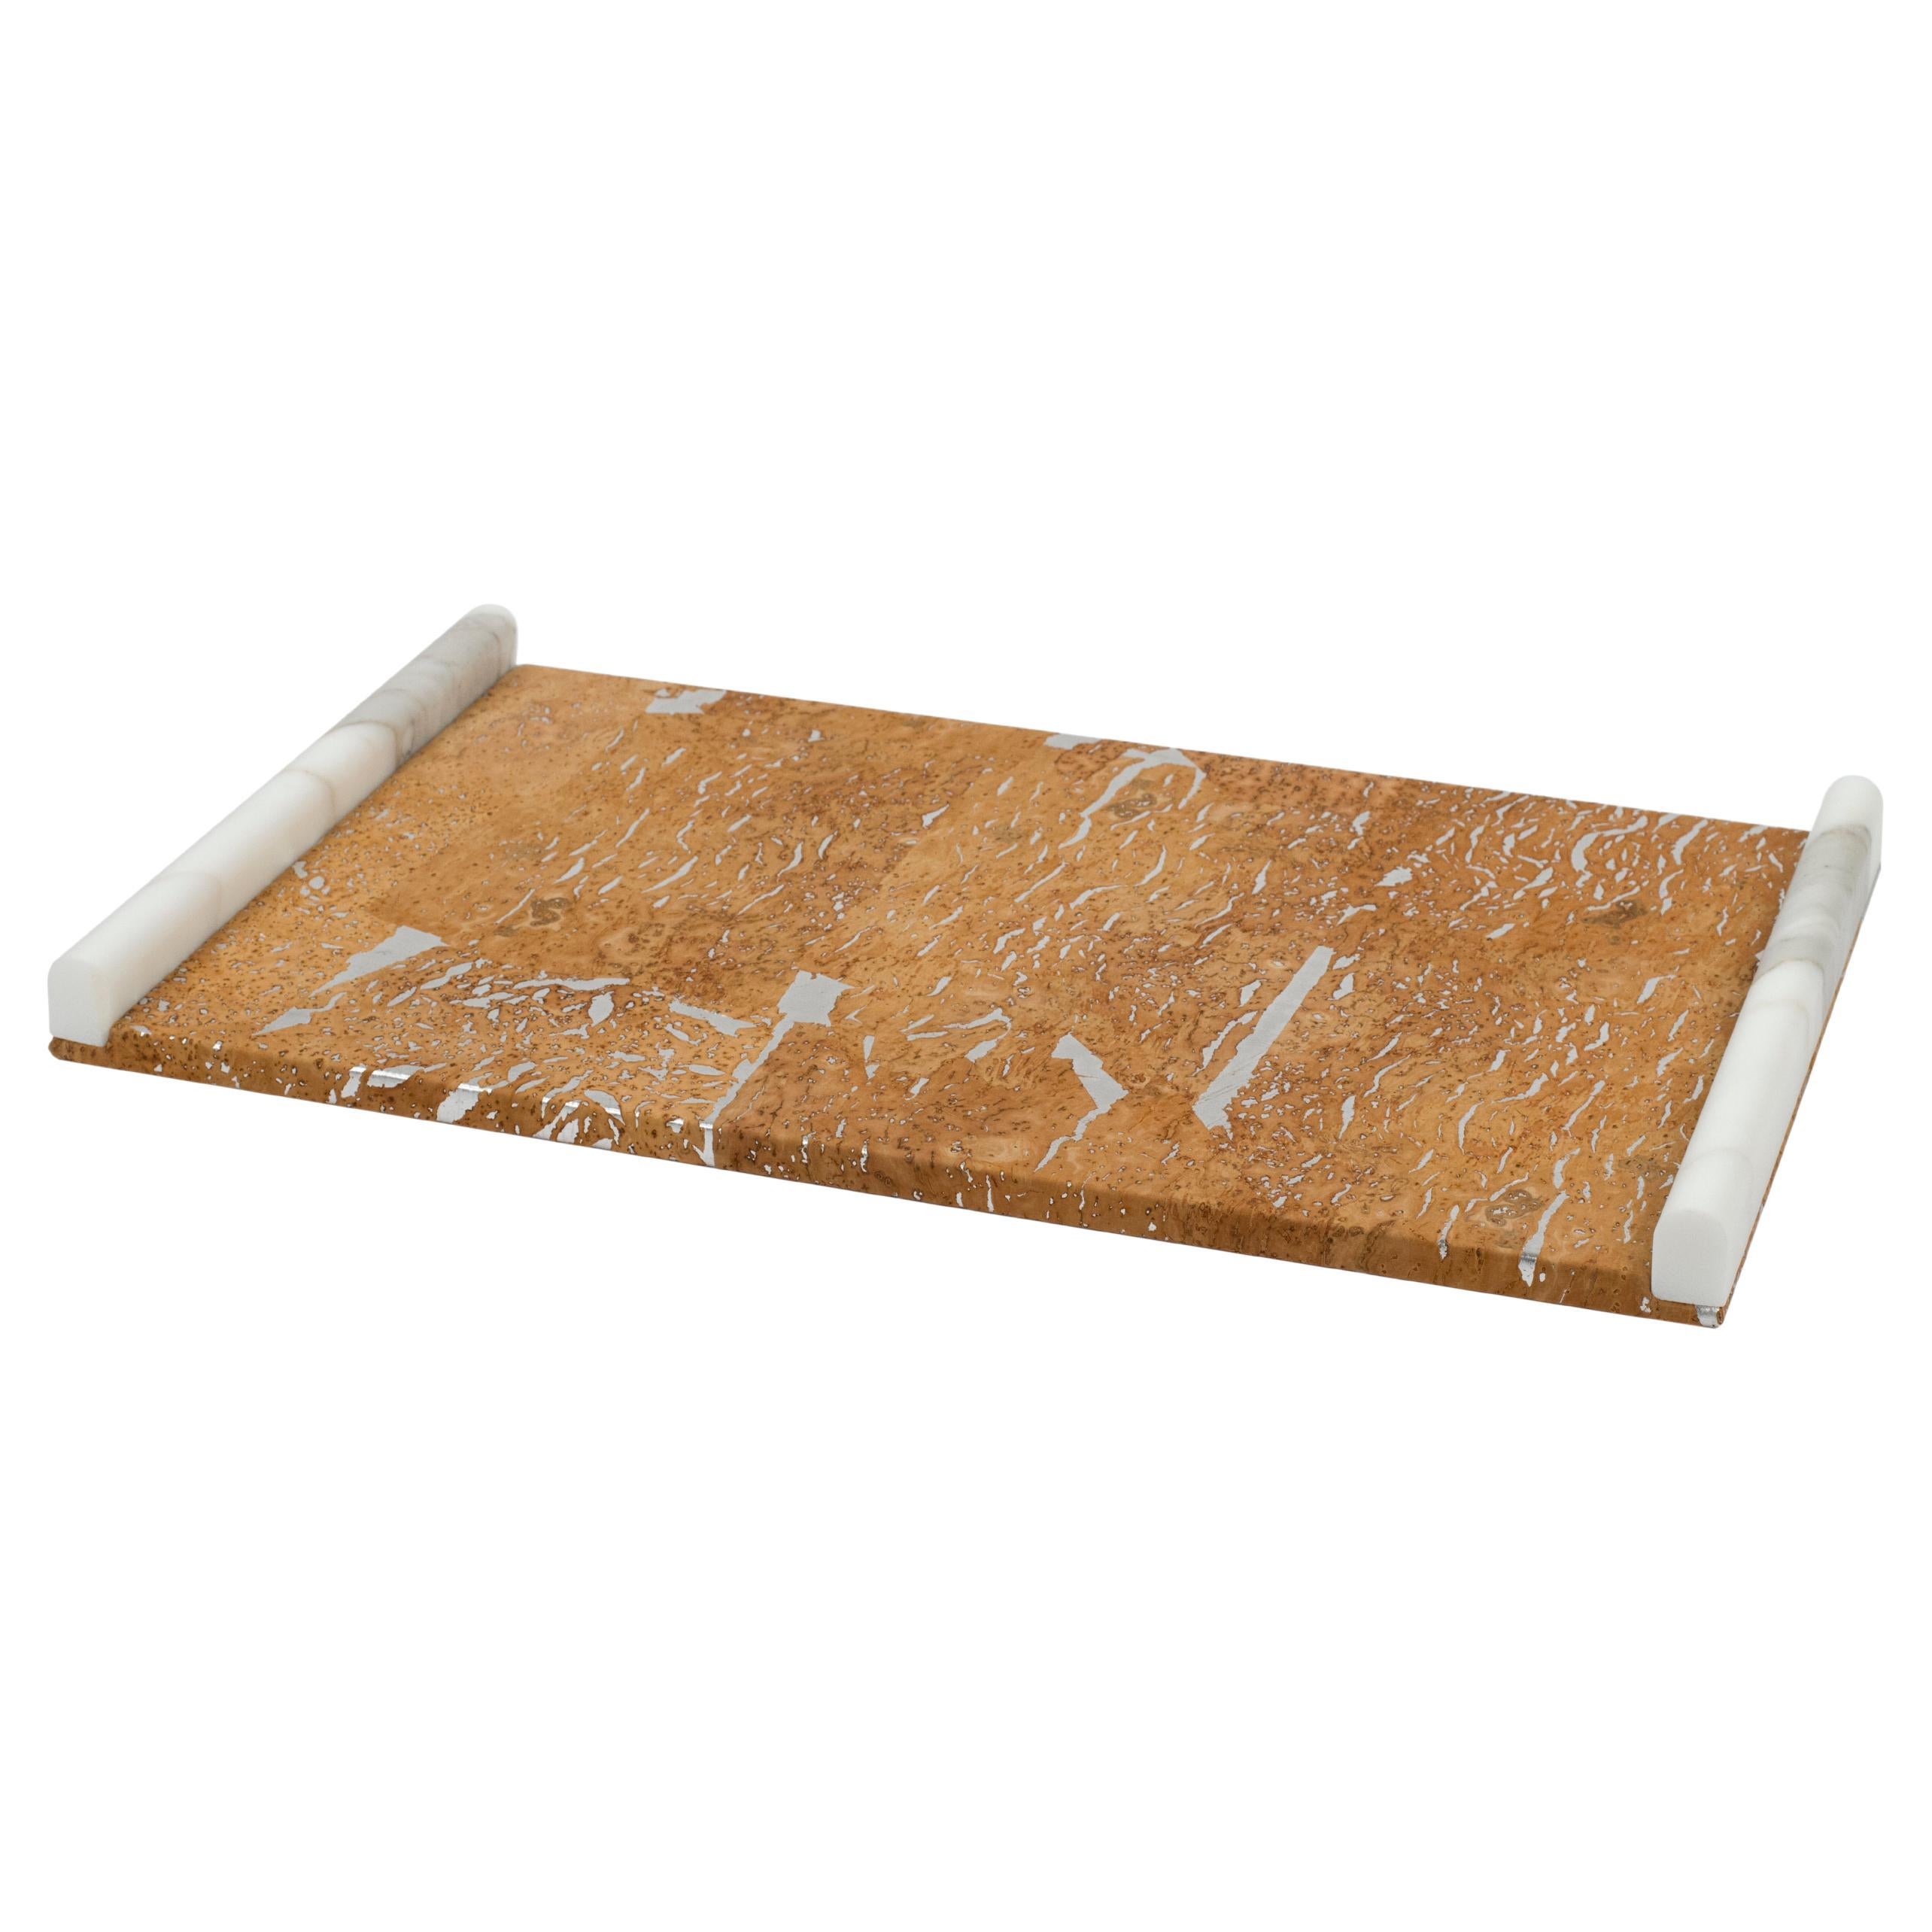 Serving Tray, Calacatta Marble & Cork, Handmade in Portugal by Lusitanus Home